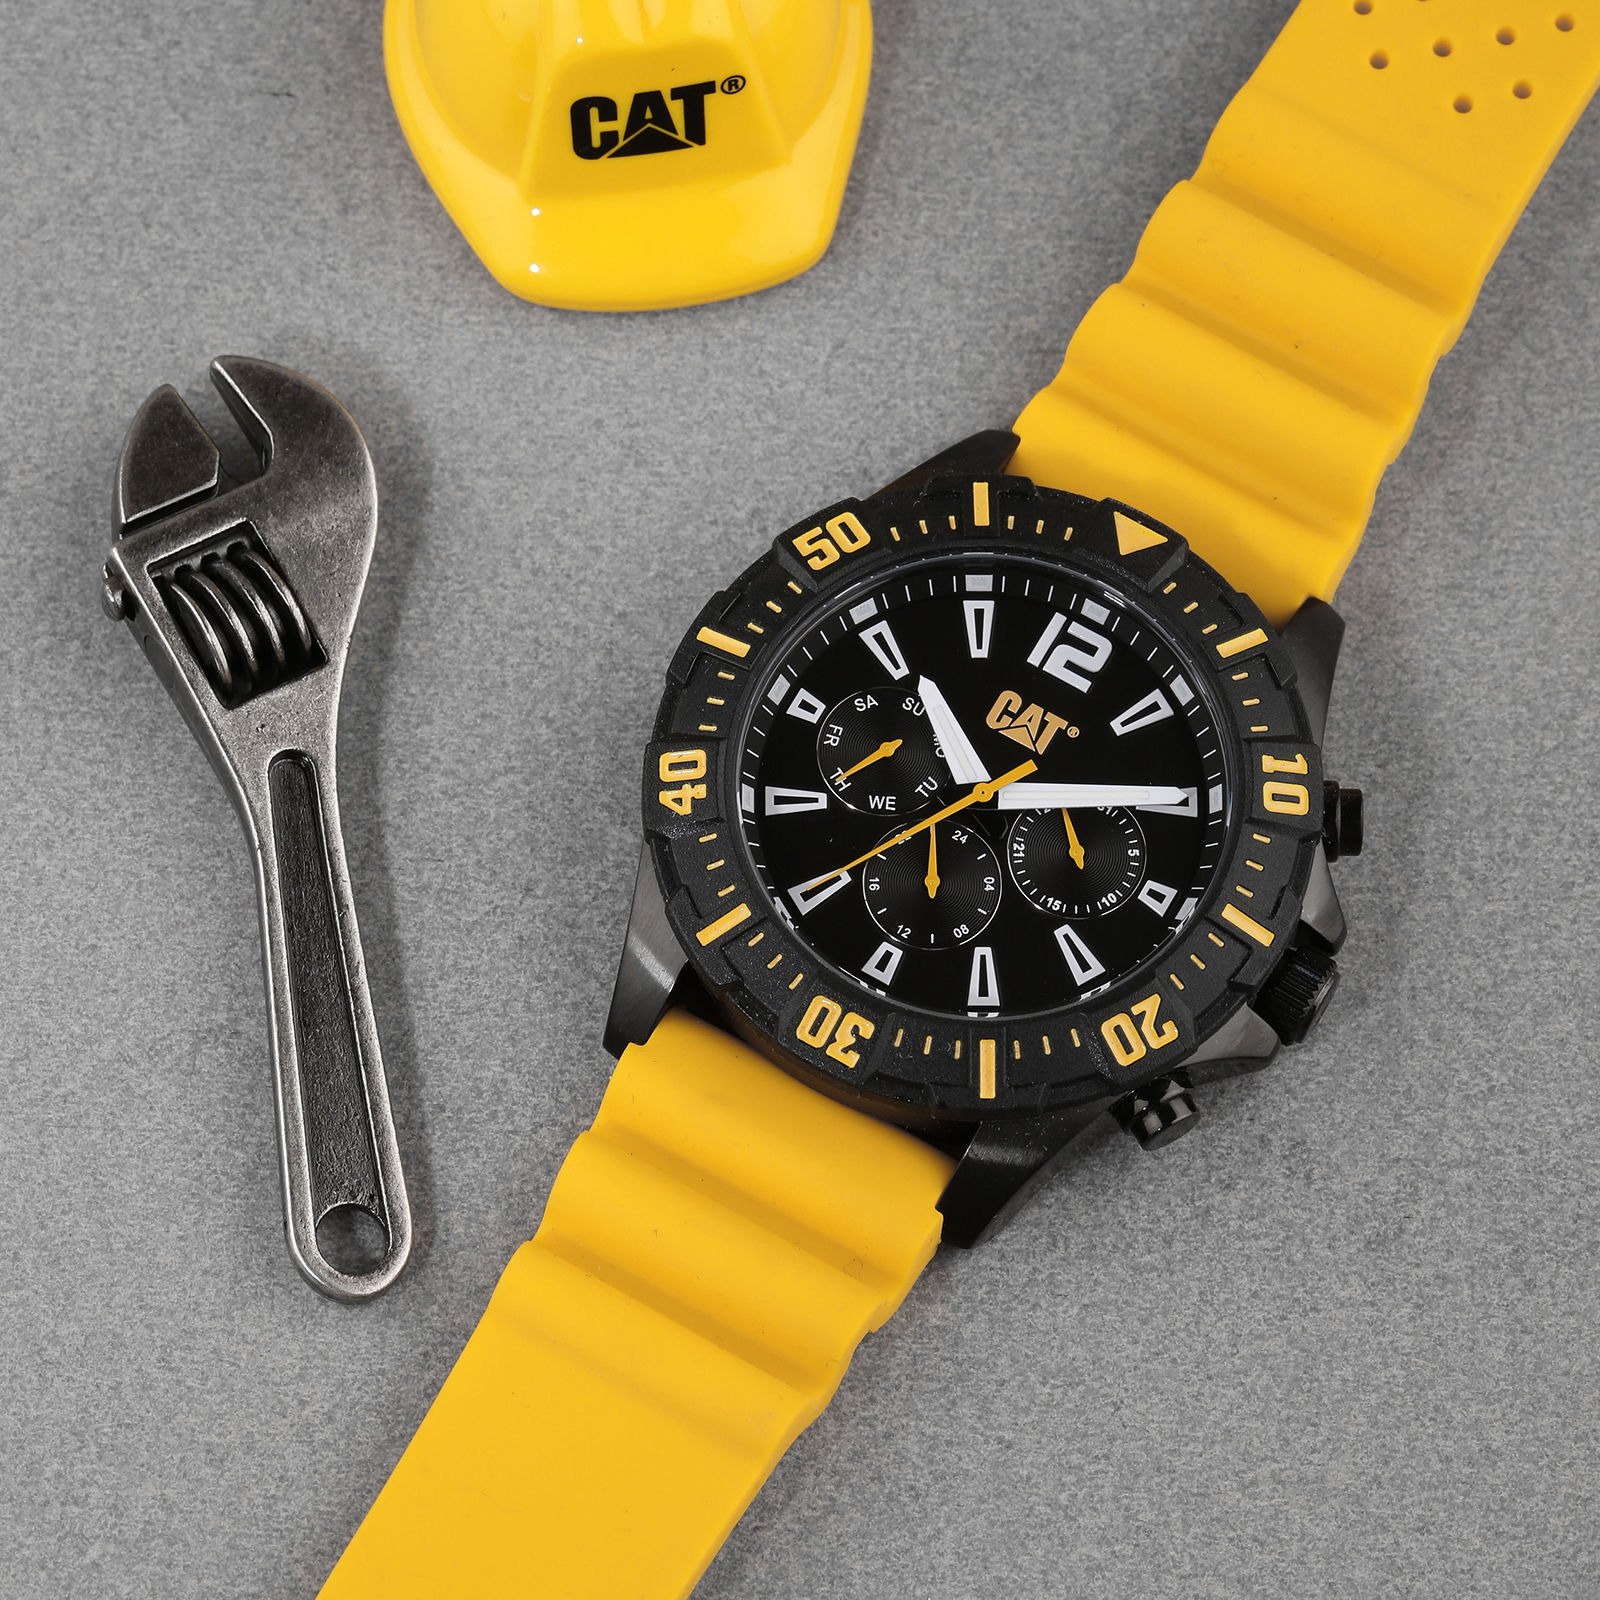 LF.111.25.537 Groovy Grey Yellow Watch | Catwatches.com